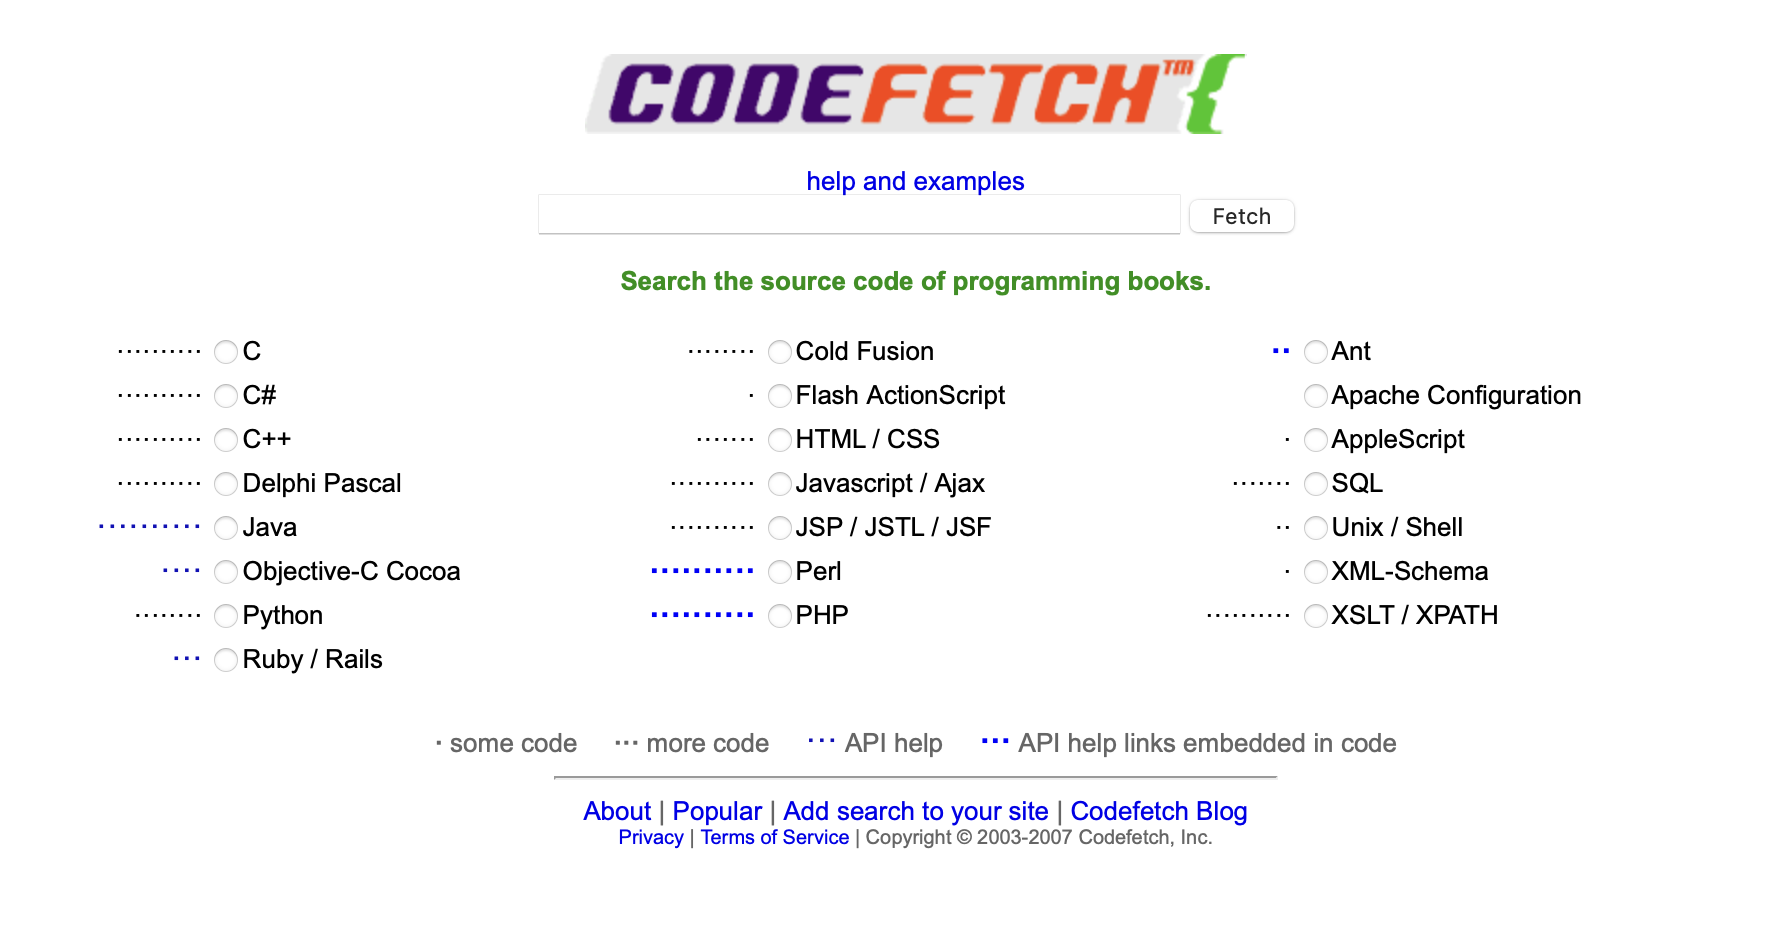 Screen capture of Codefetch home search interface